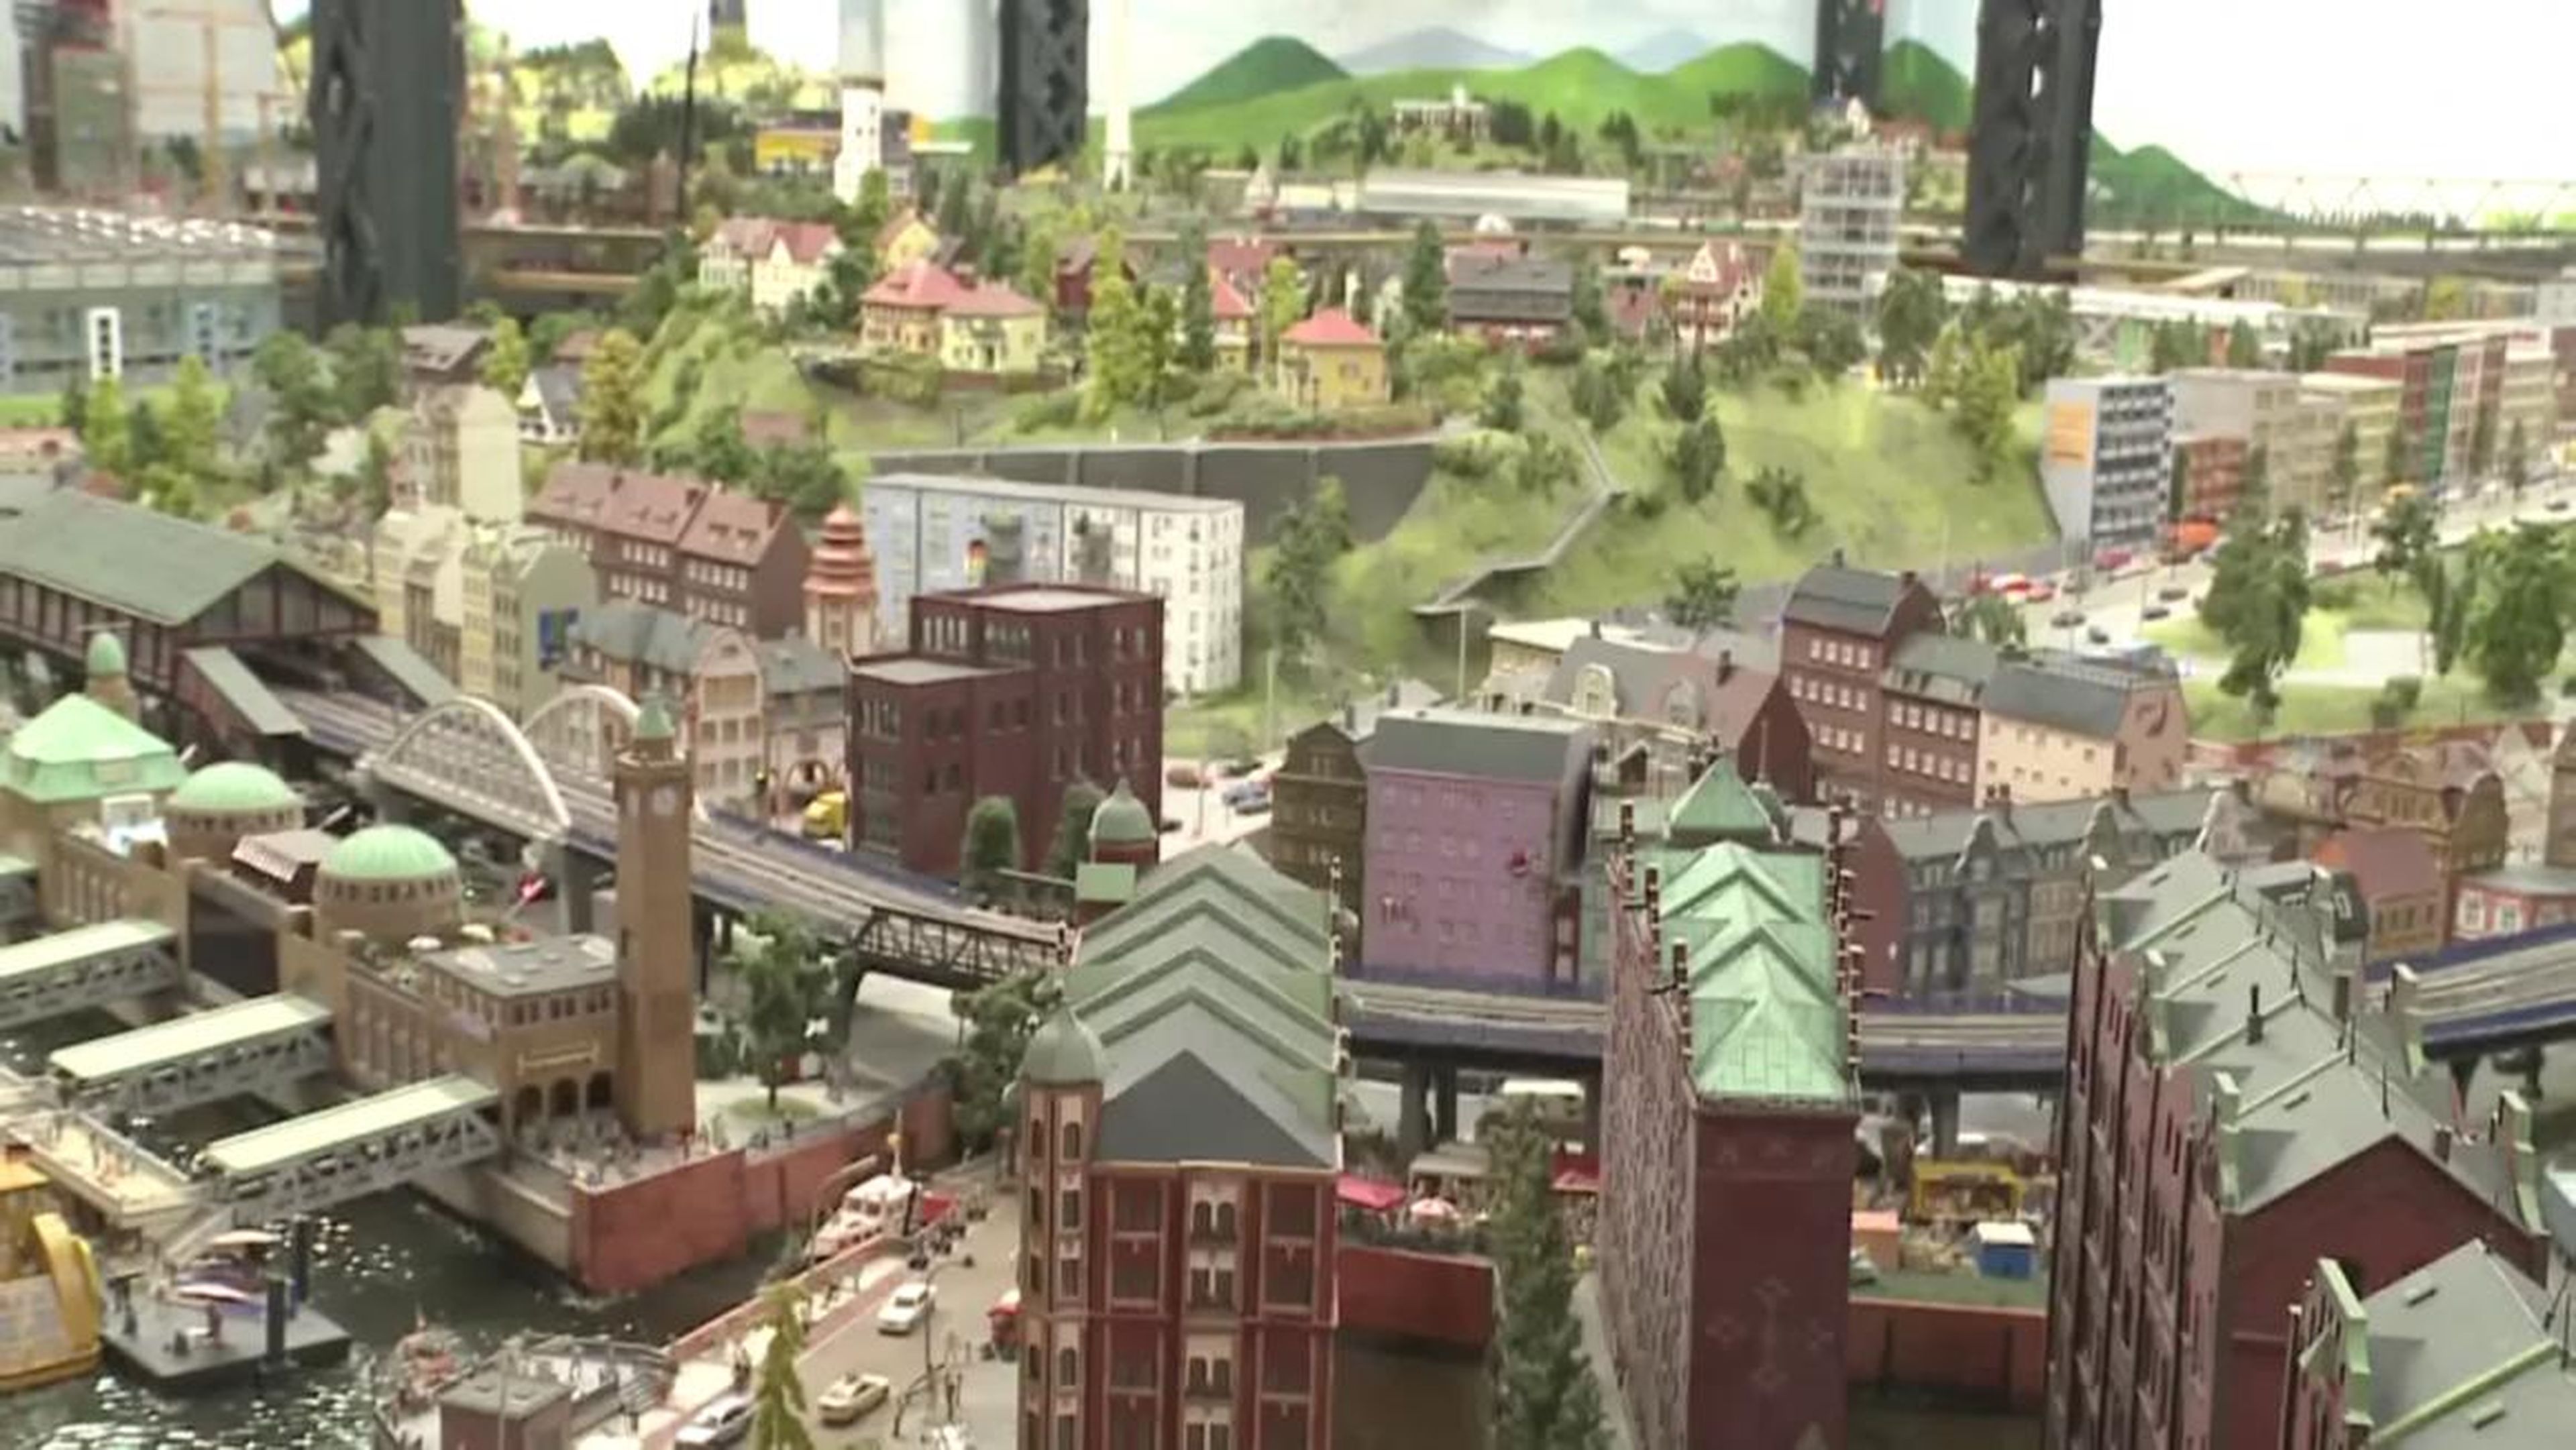 And finally, here's the fictional town of Knuffingen.